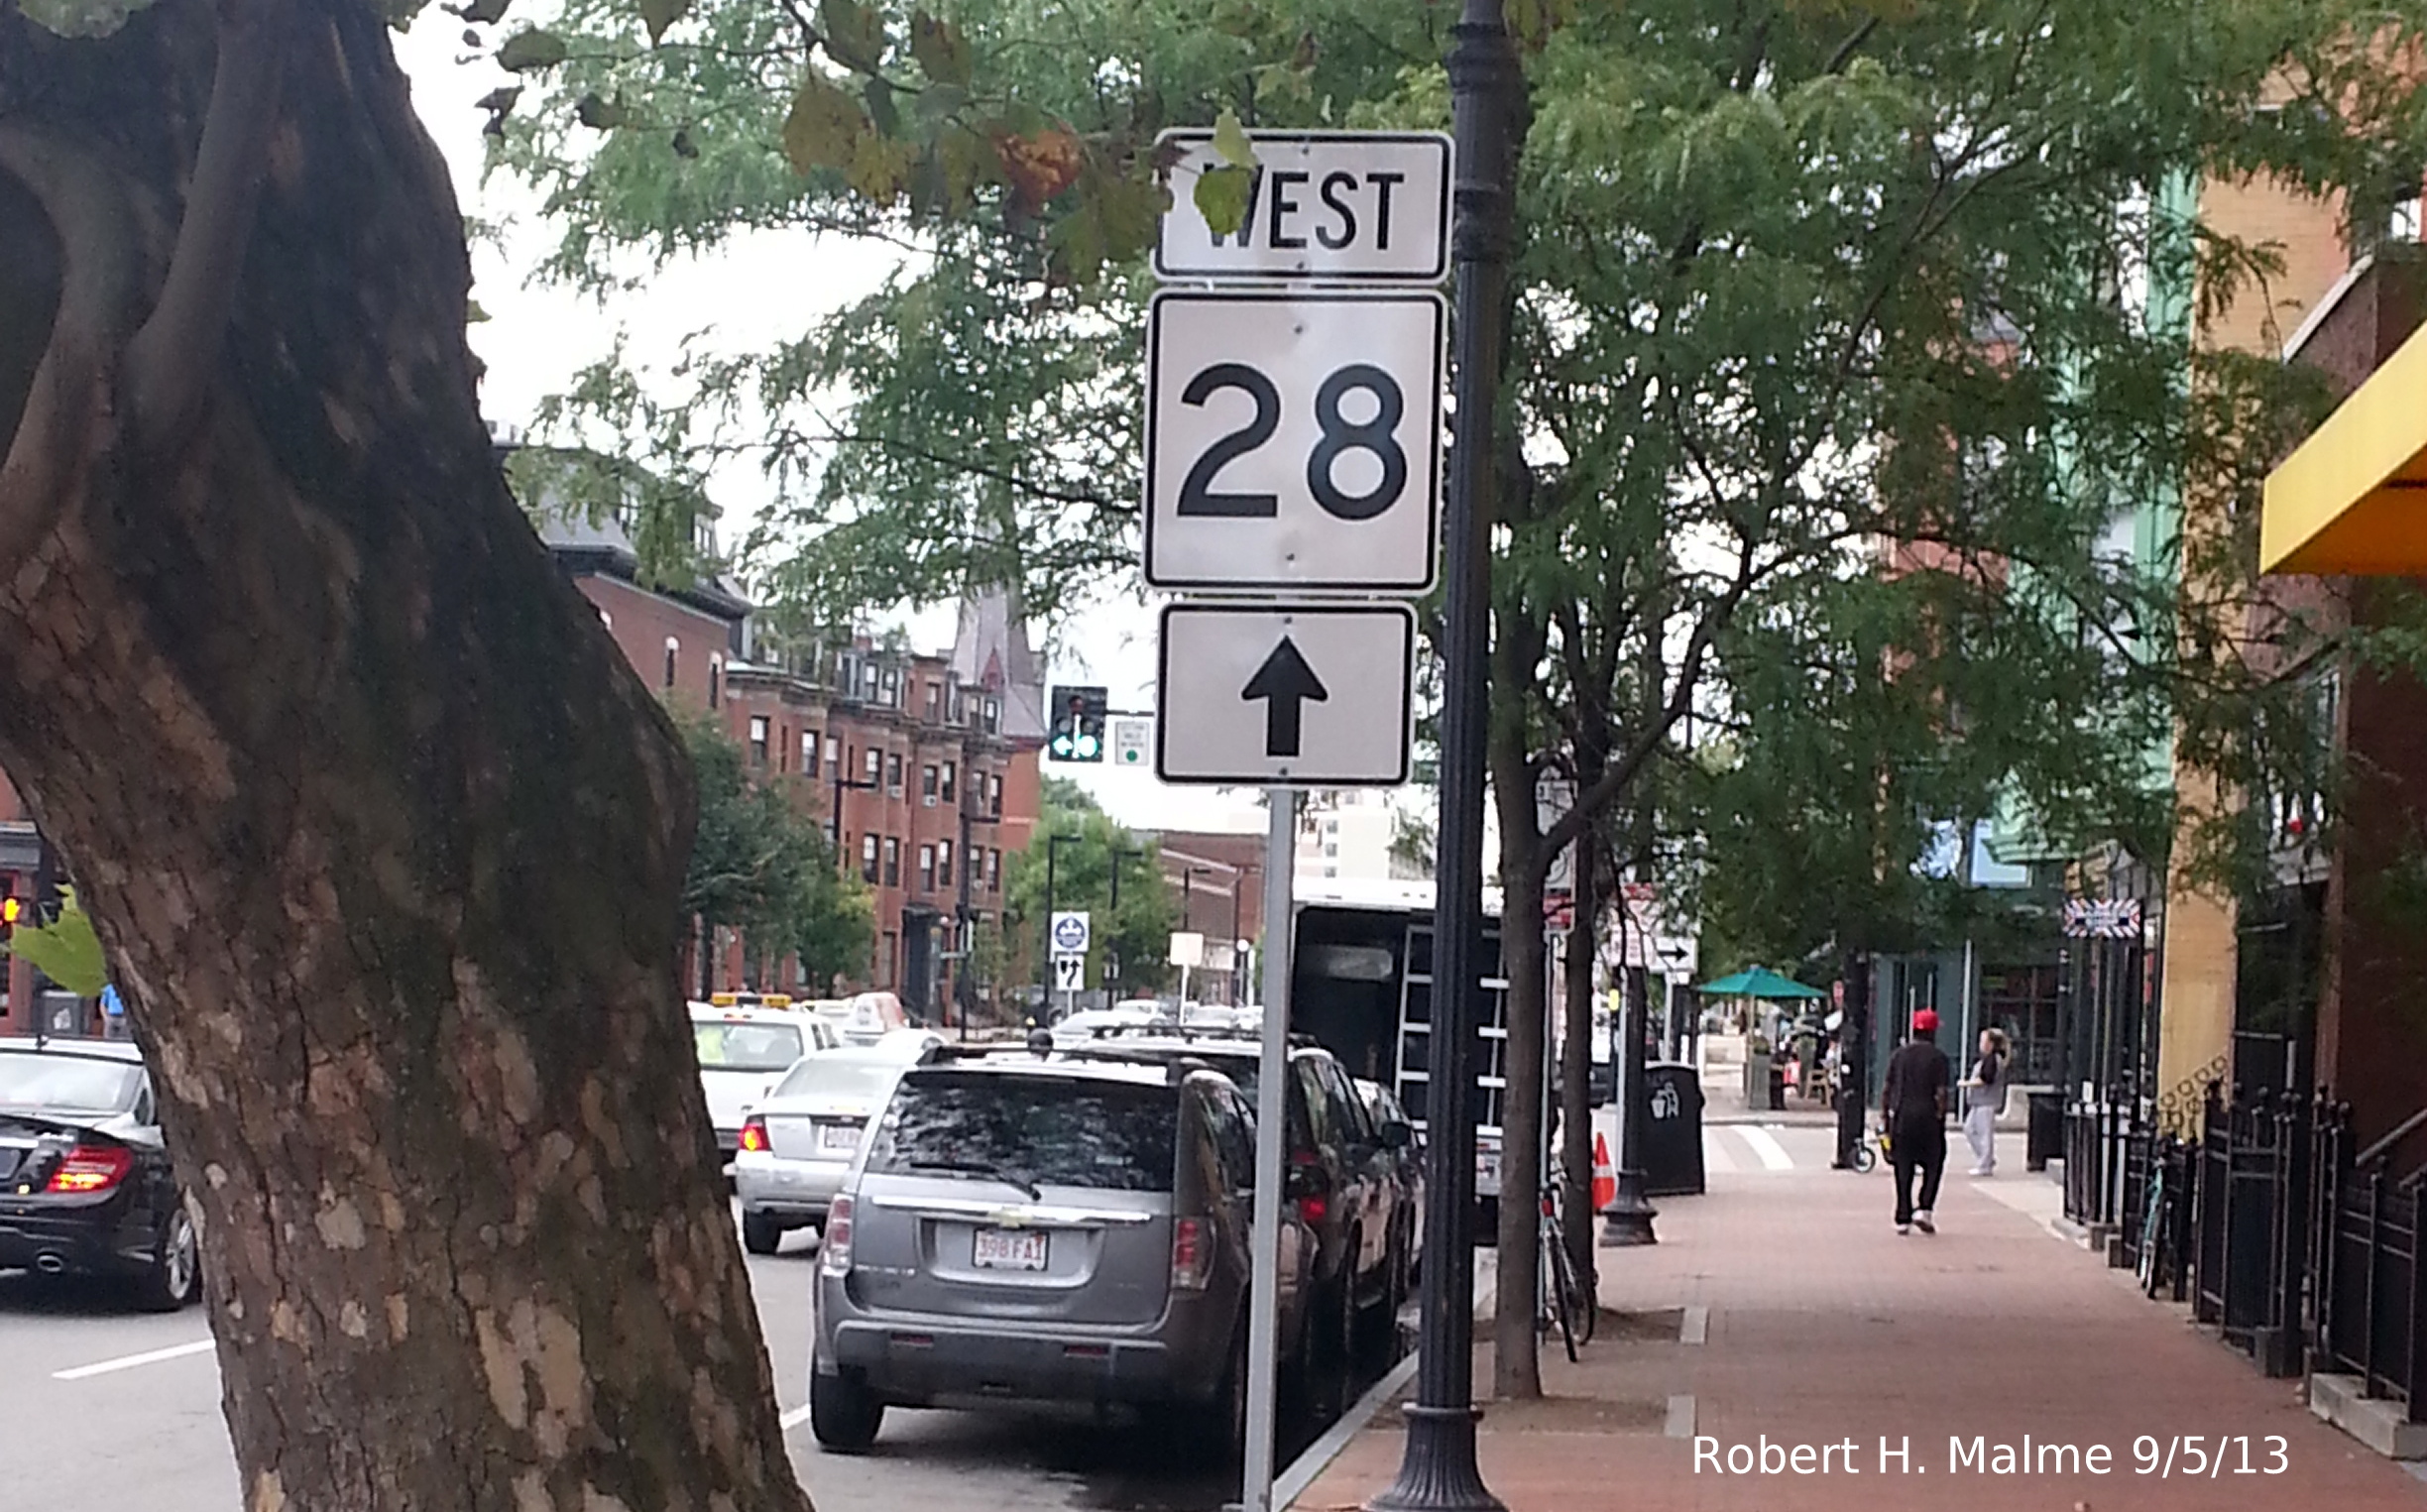 Photo of MA 28 East Sign along Tremont St in Boston, Sept. 2013